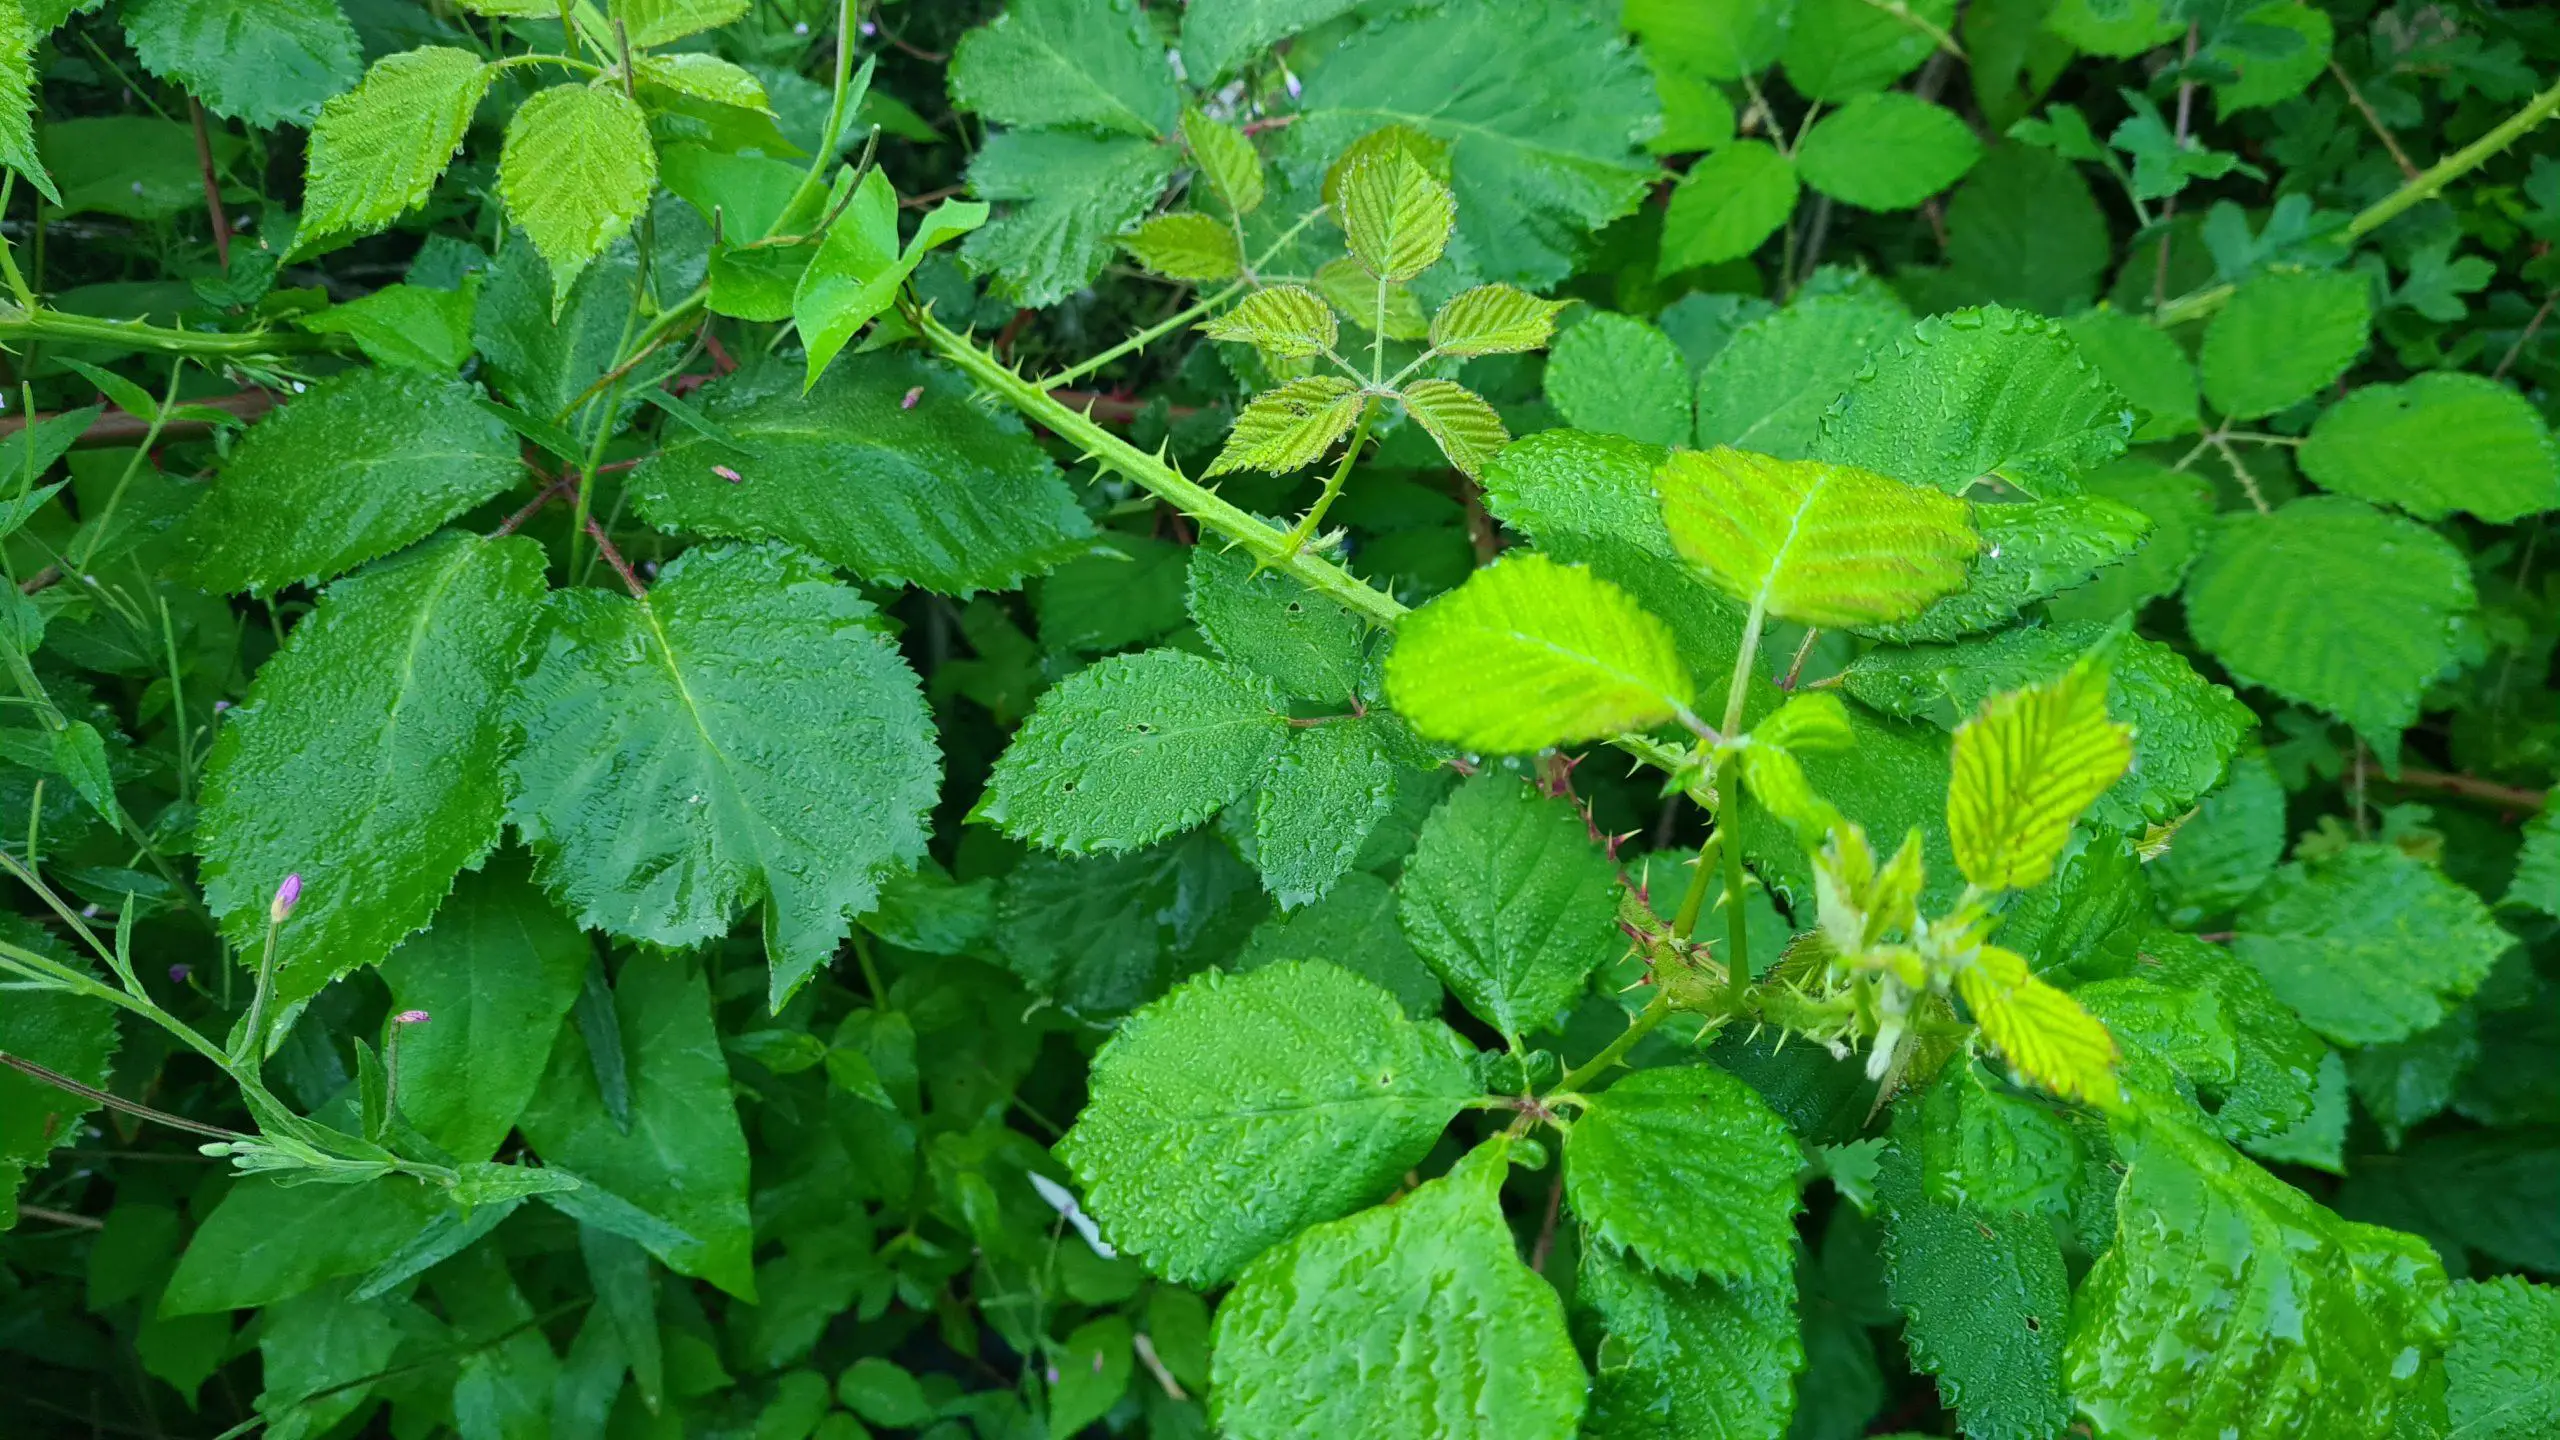 Brambles consuming an area with their leaf coverage